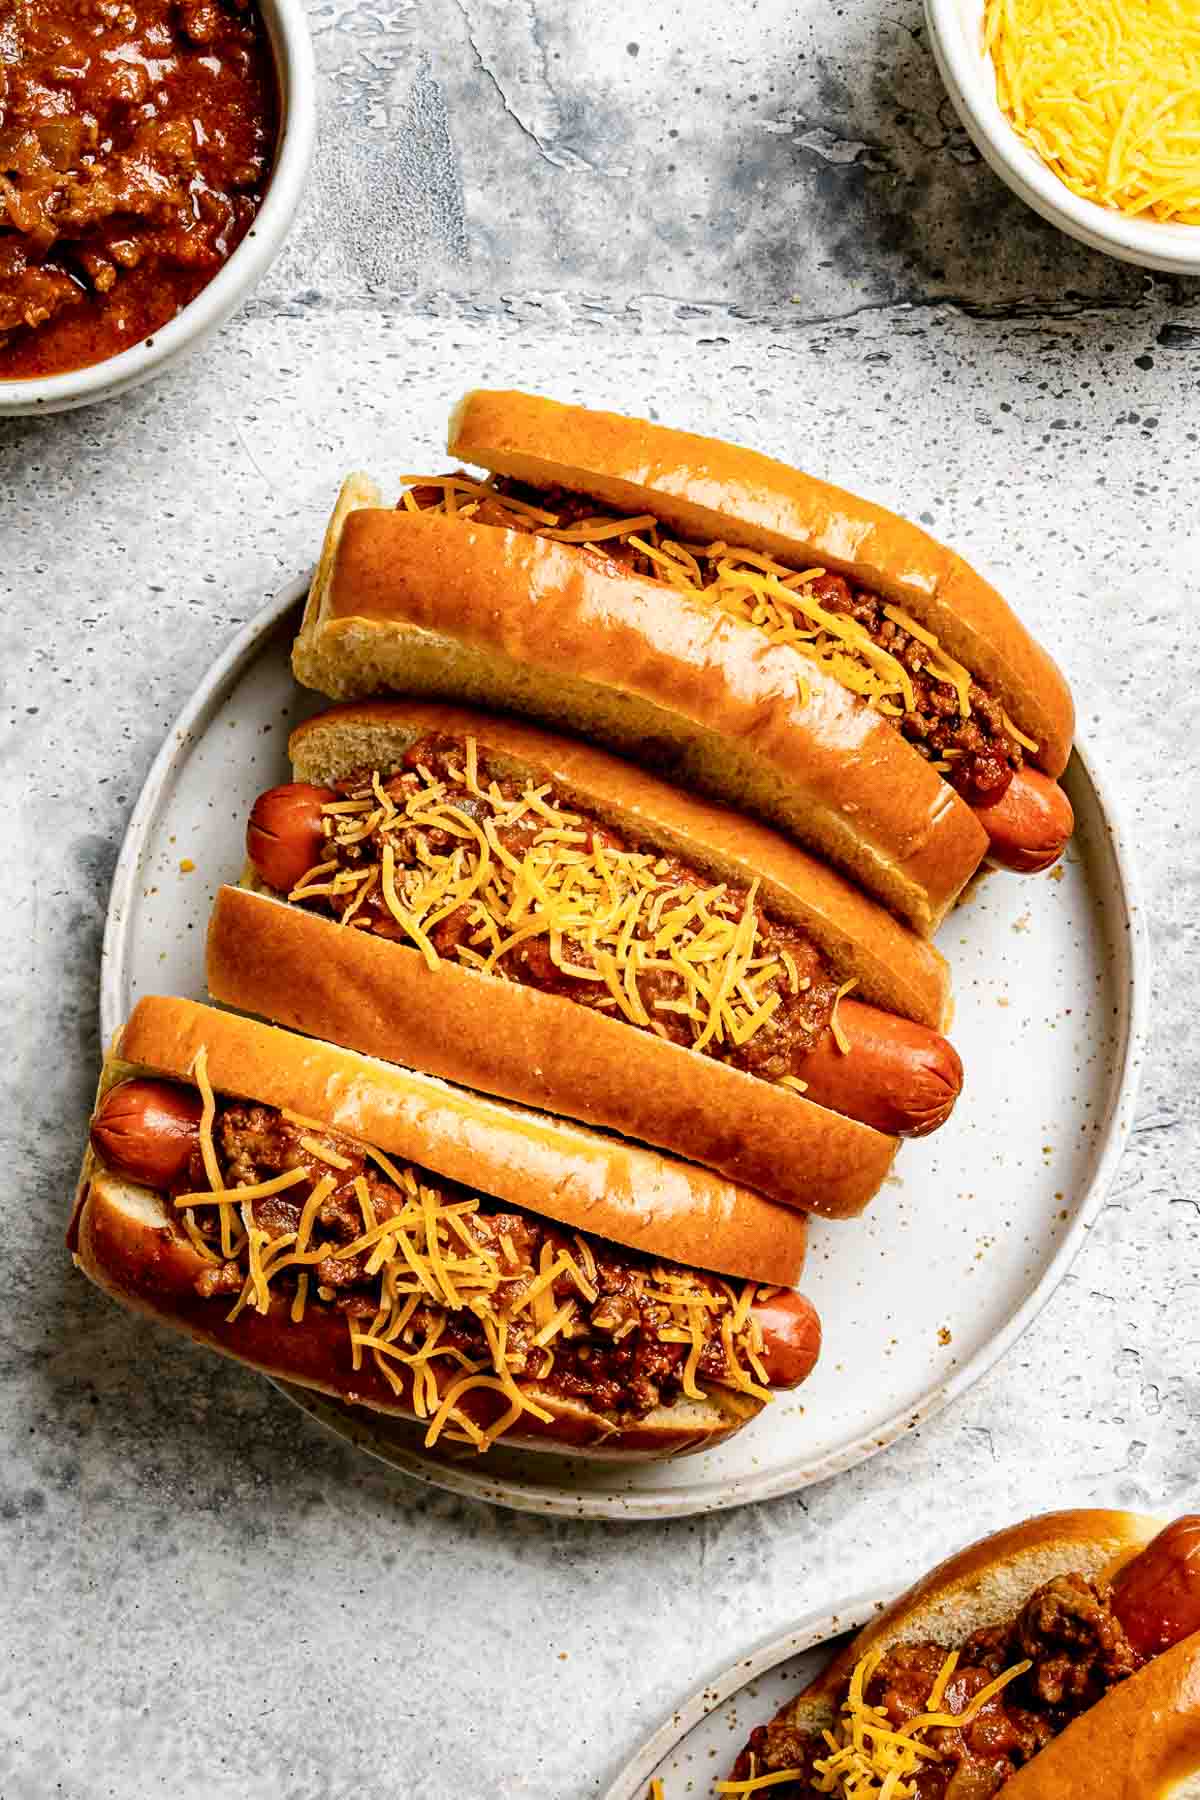 Homemade hot dog chili on hot dogs.